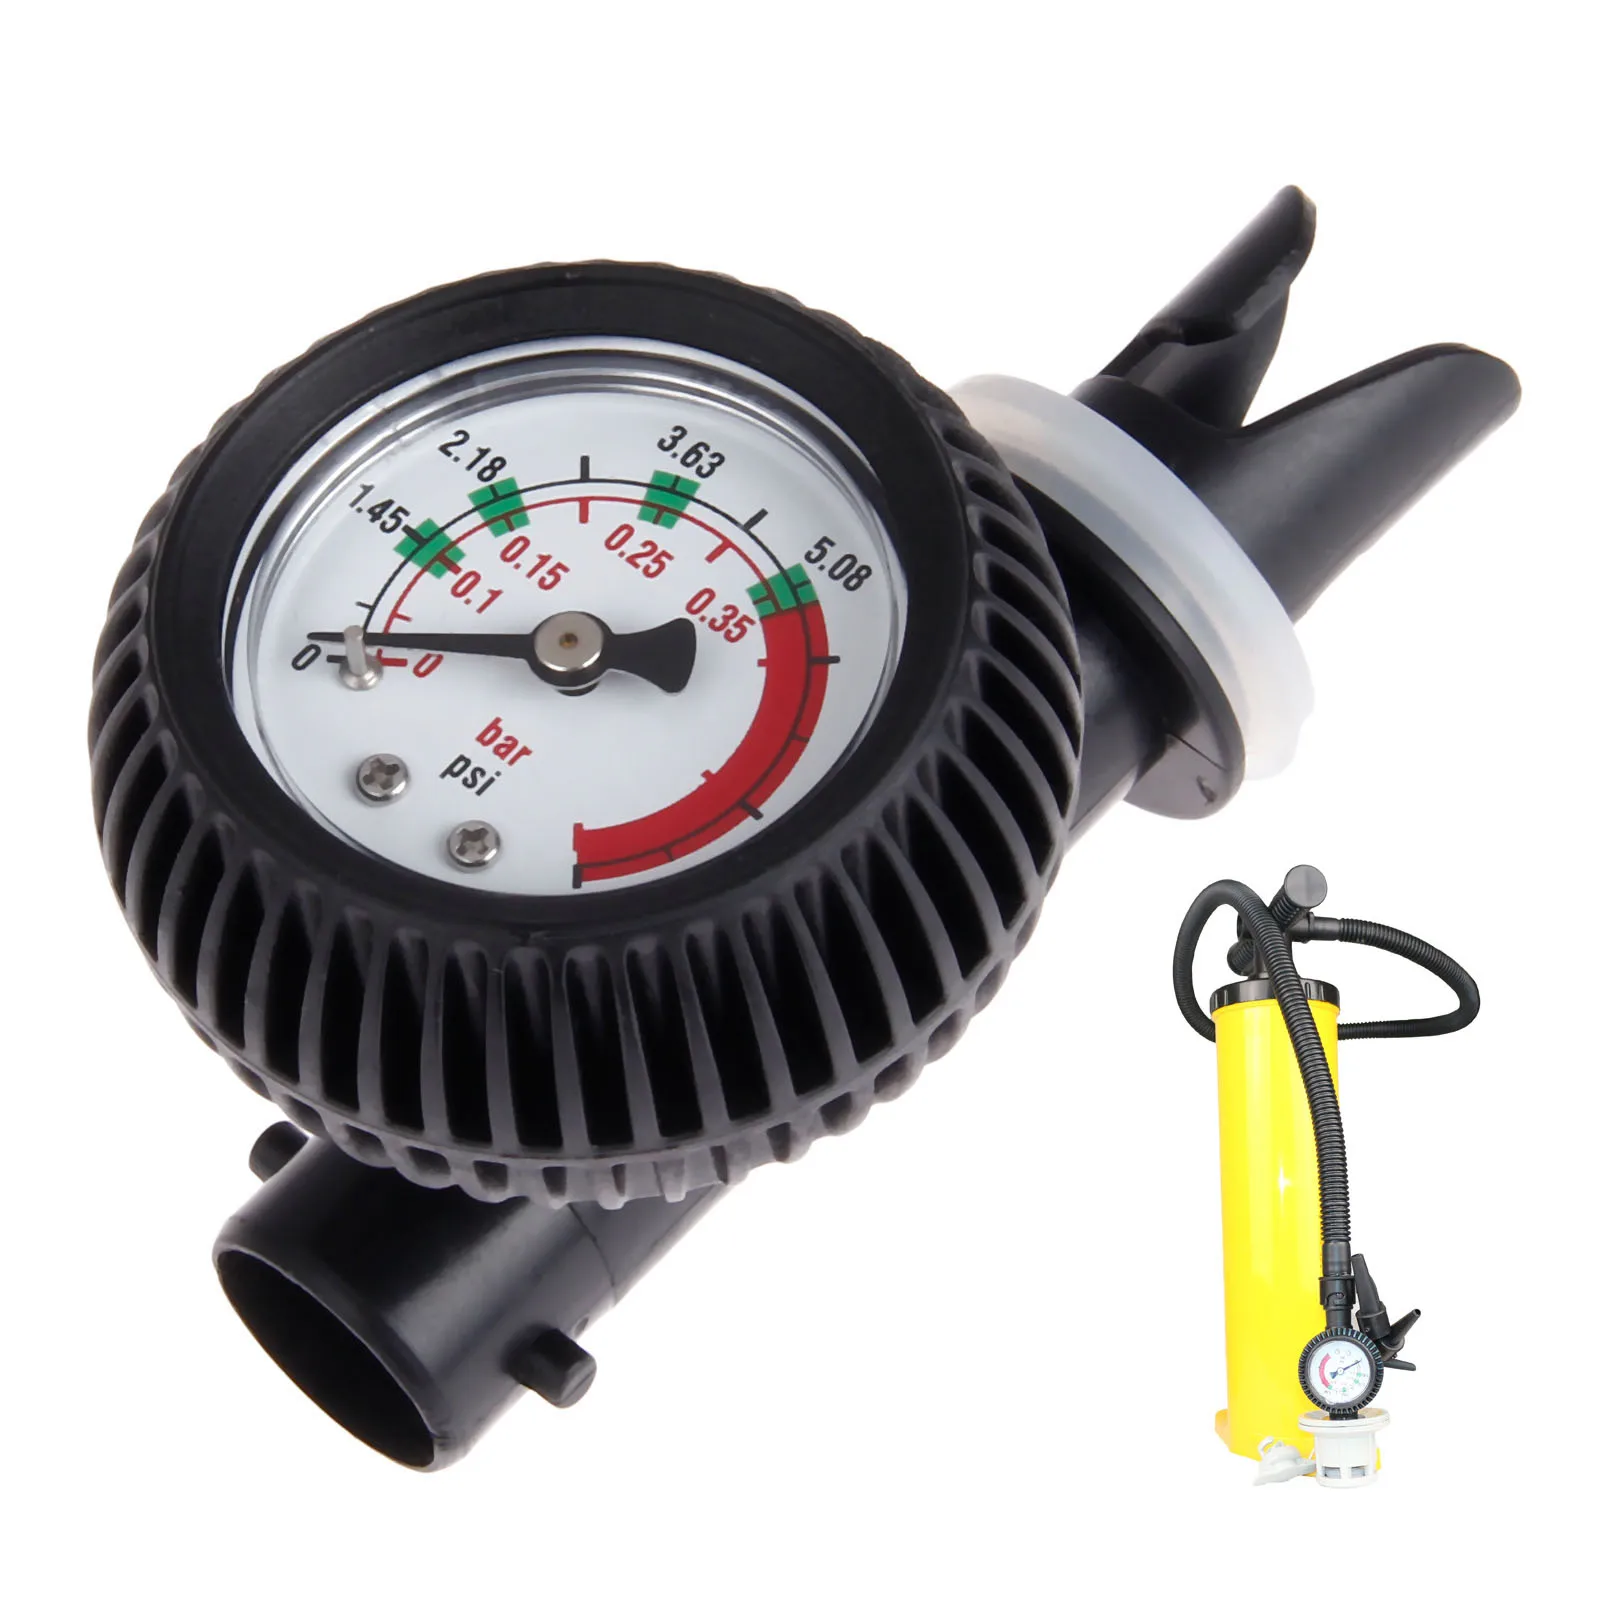 1 Pc Pressure Gauge Air Thermometer For Inflatable Boat Kayak Test Air Pressure Valve Connector Adapter Stand Up Paddle Boards